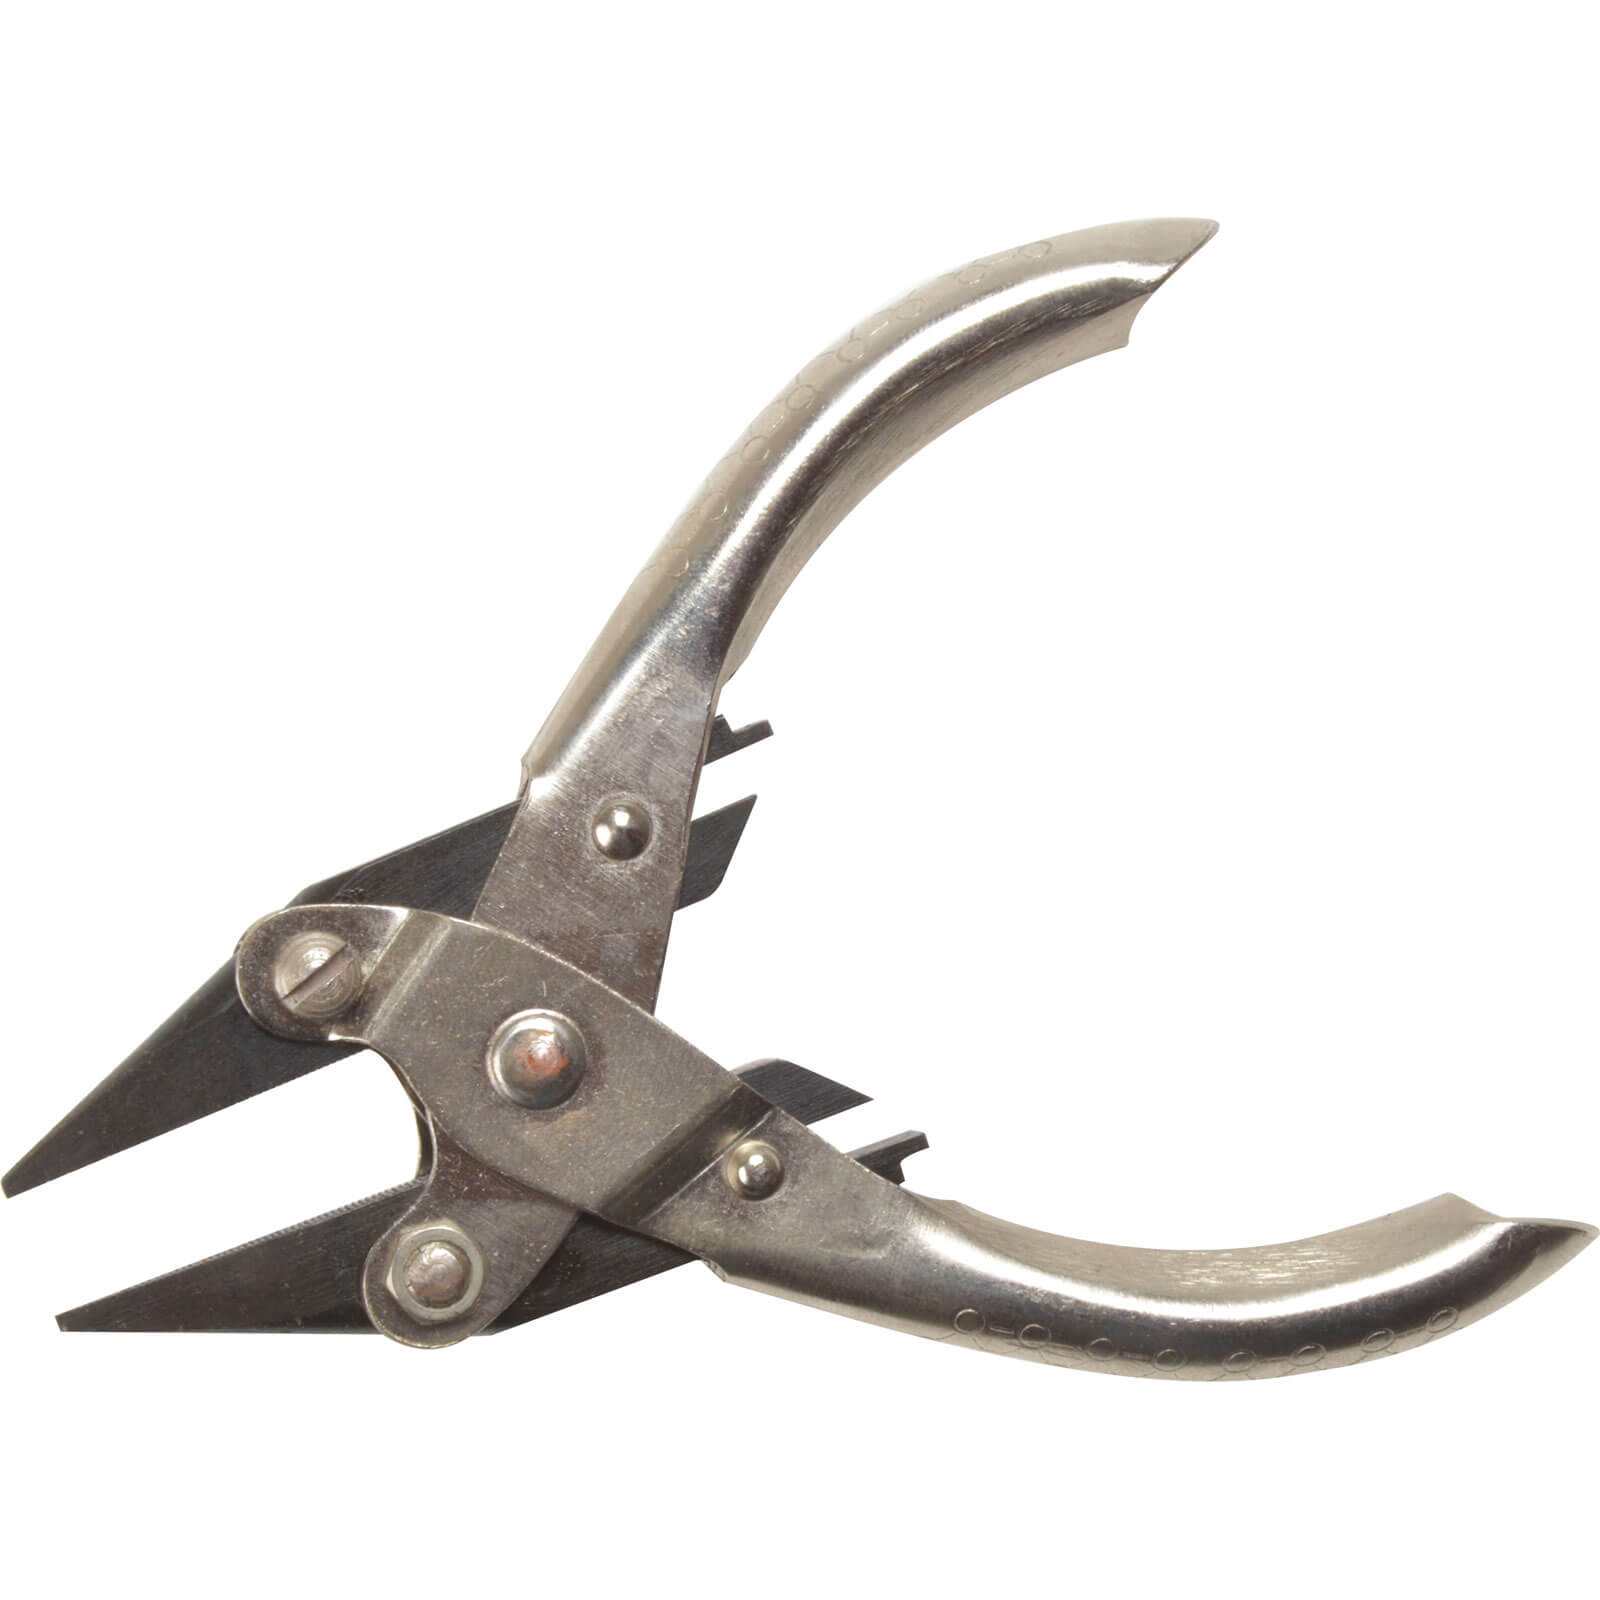 Image of Maun Snipe Nose Serrated Jaws Pliers 125mm